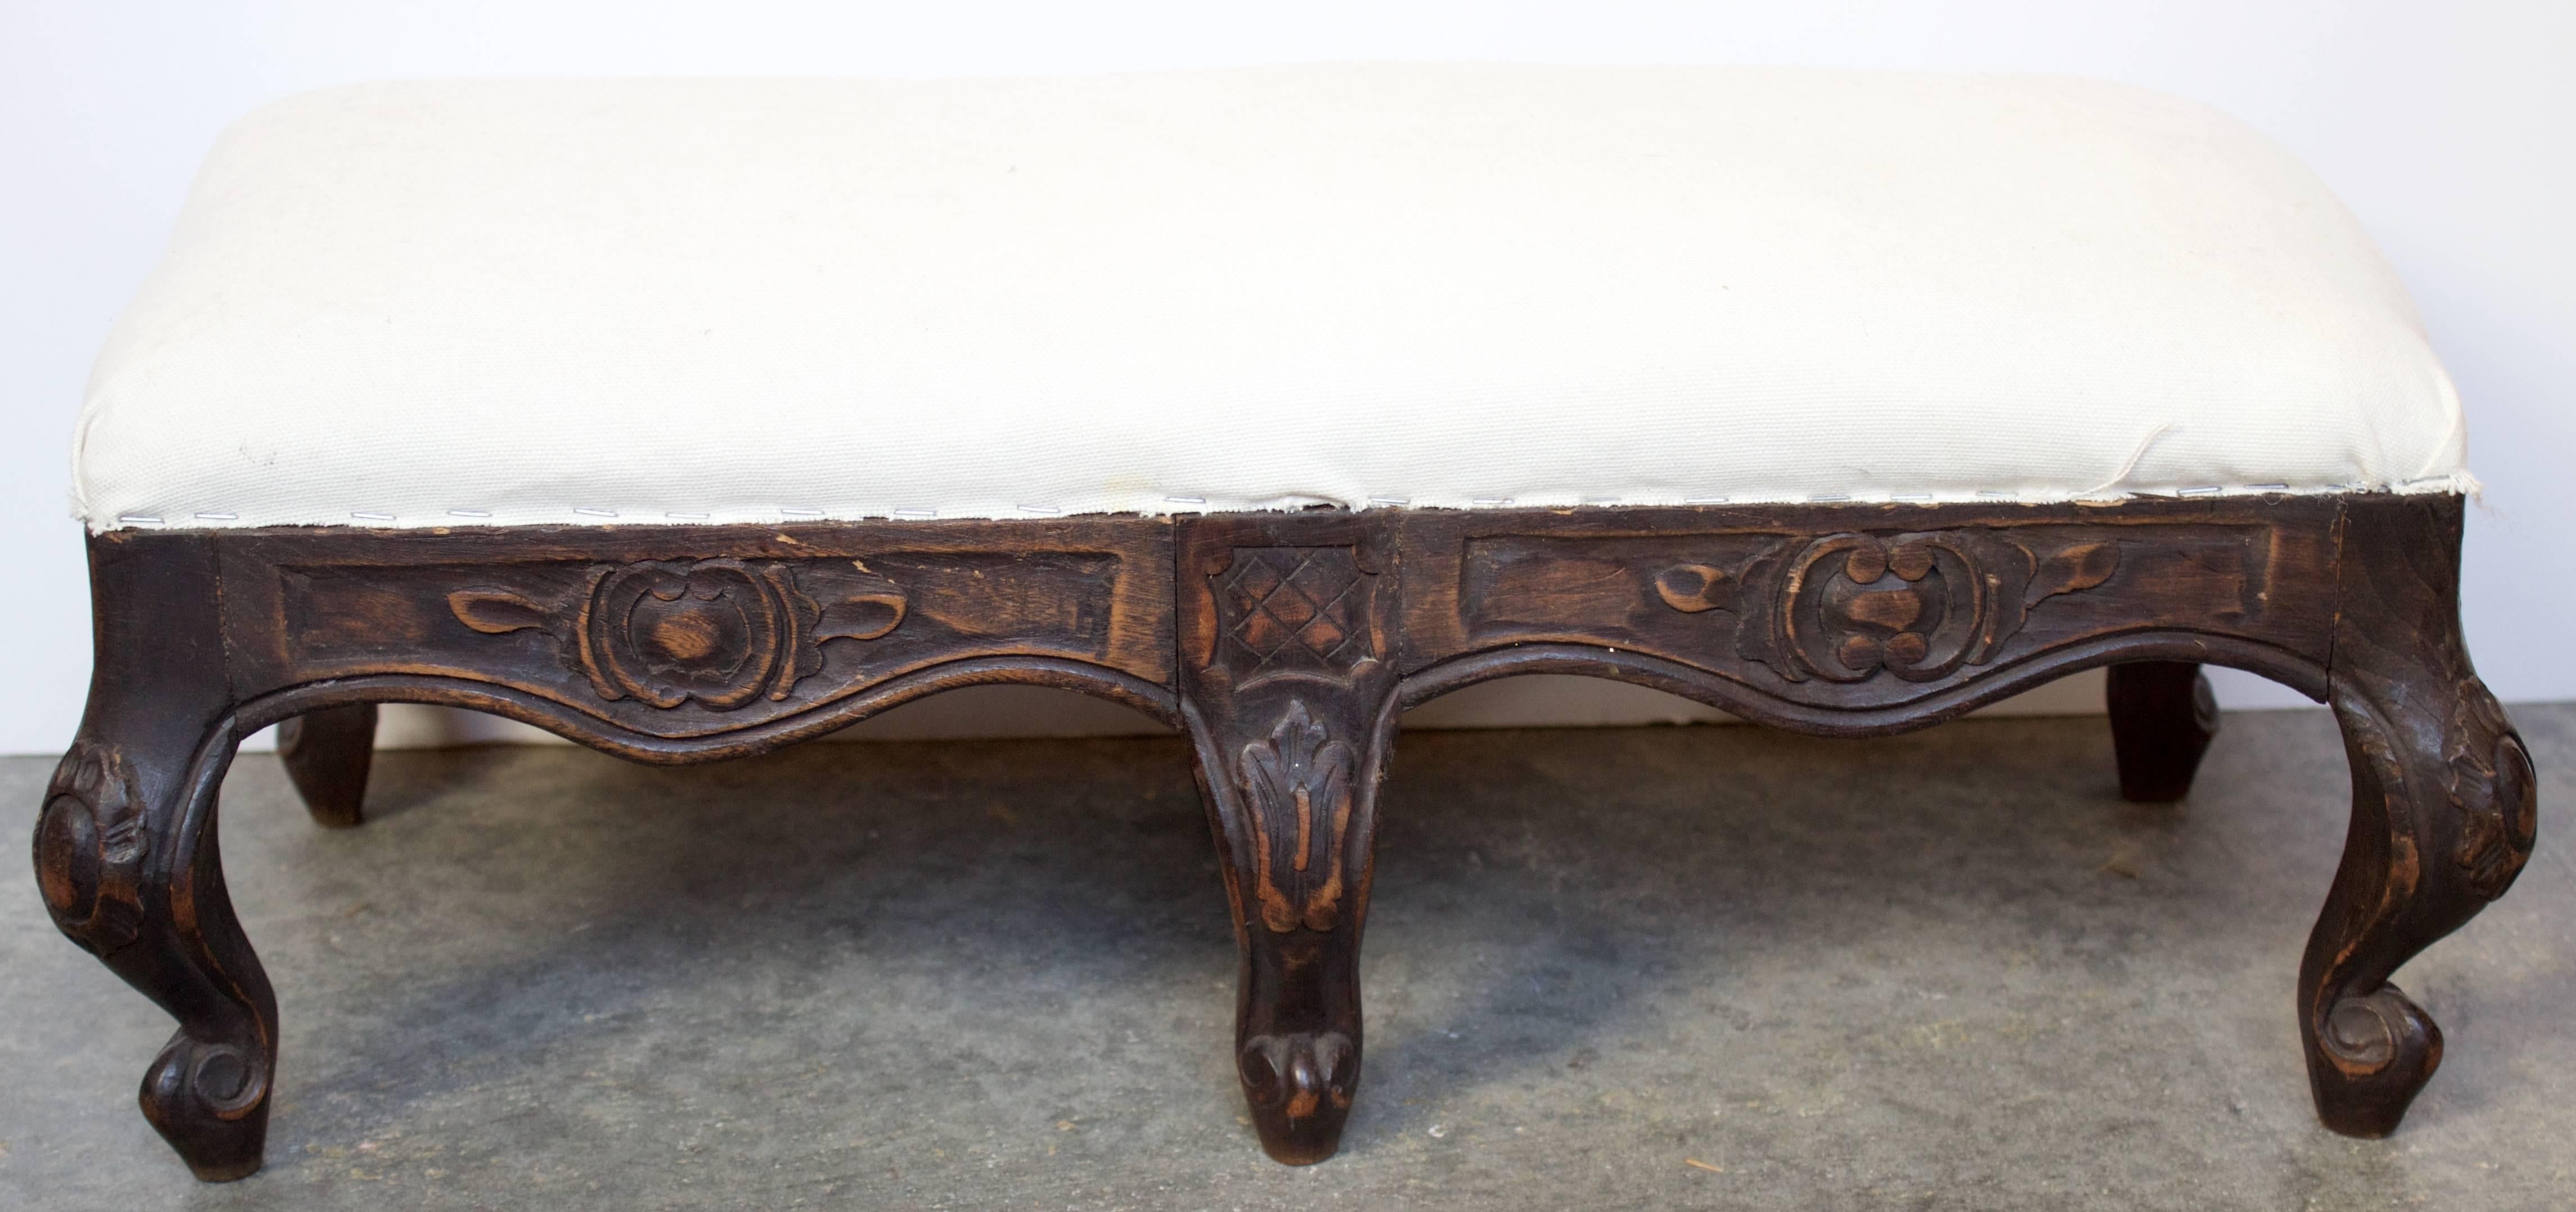 Provencial Louis XV style footstool made of beechwood and finished in a walnut brown. Stool is horsehair stuffed and ready for fabric.
  